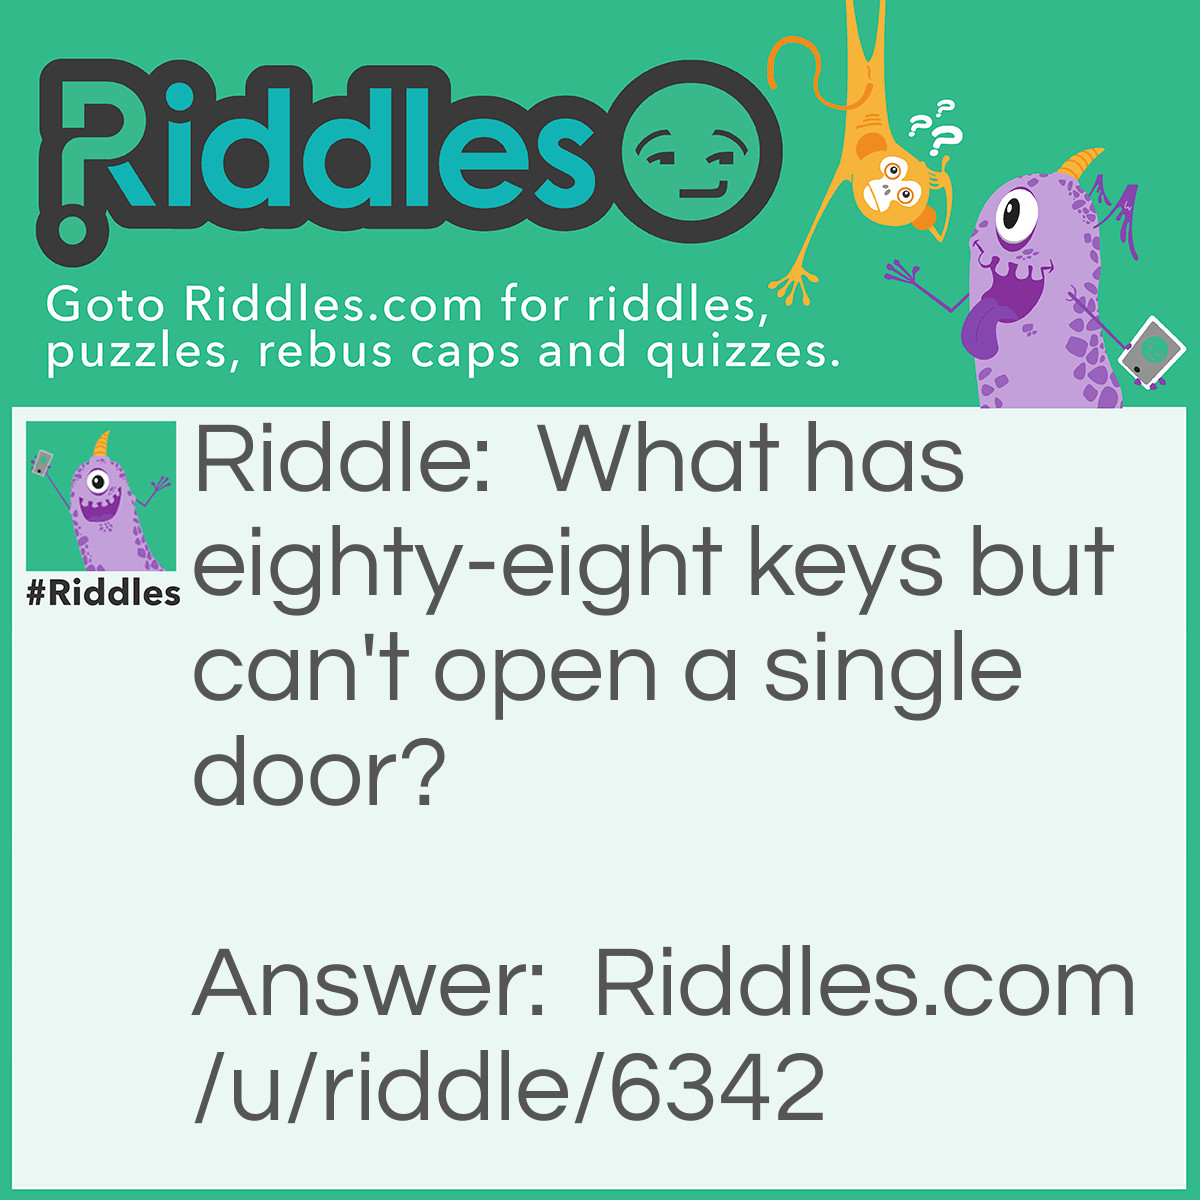 Riddle: What has eighty-eight keys but can't open a single door? Answer: A piano!